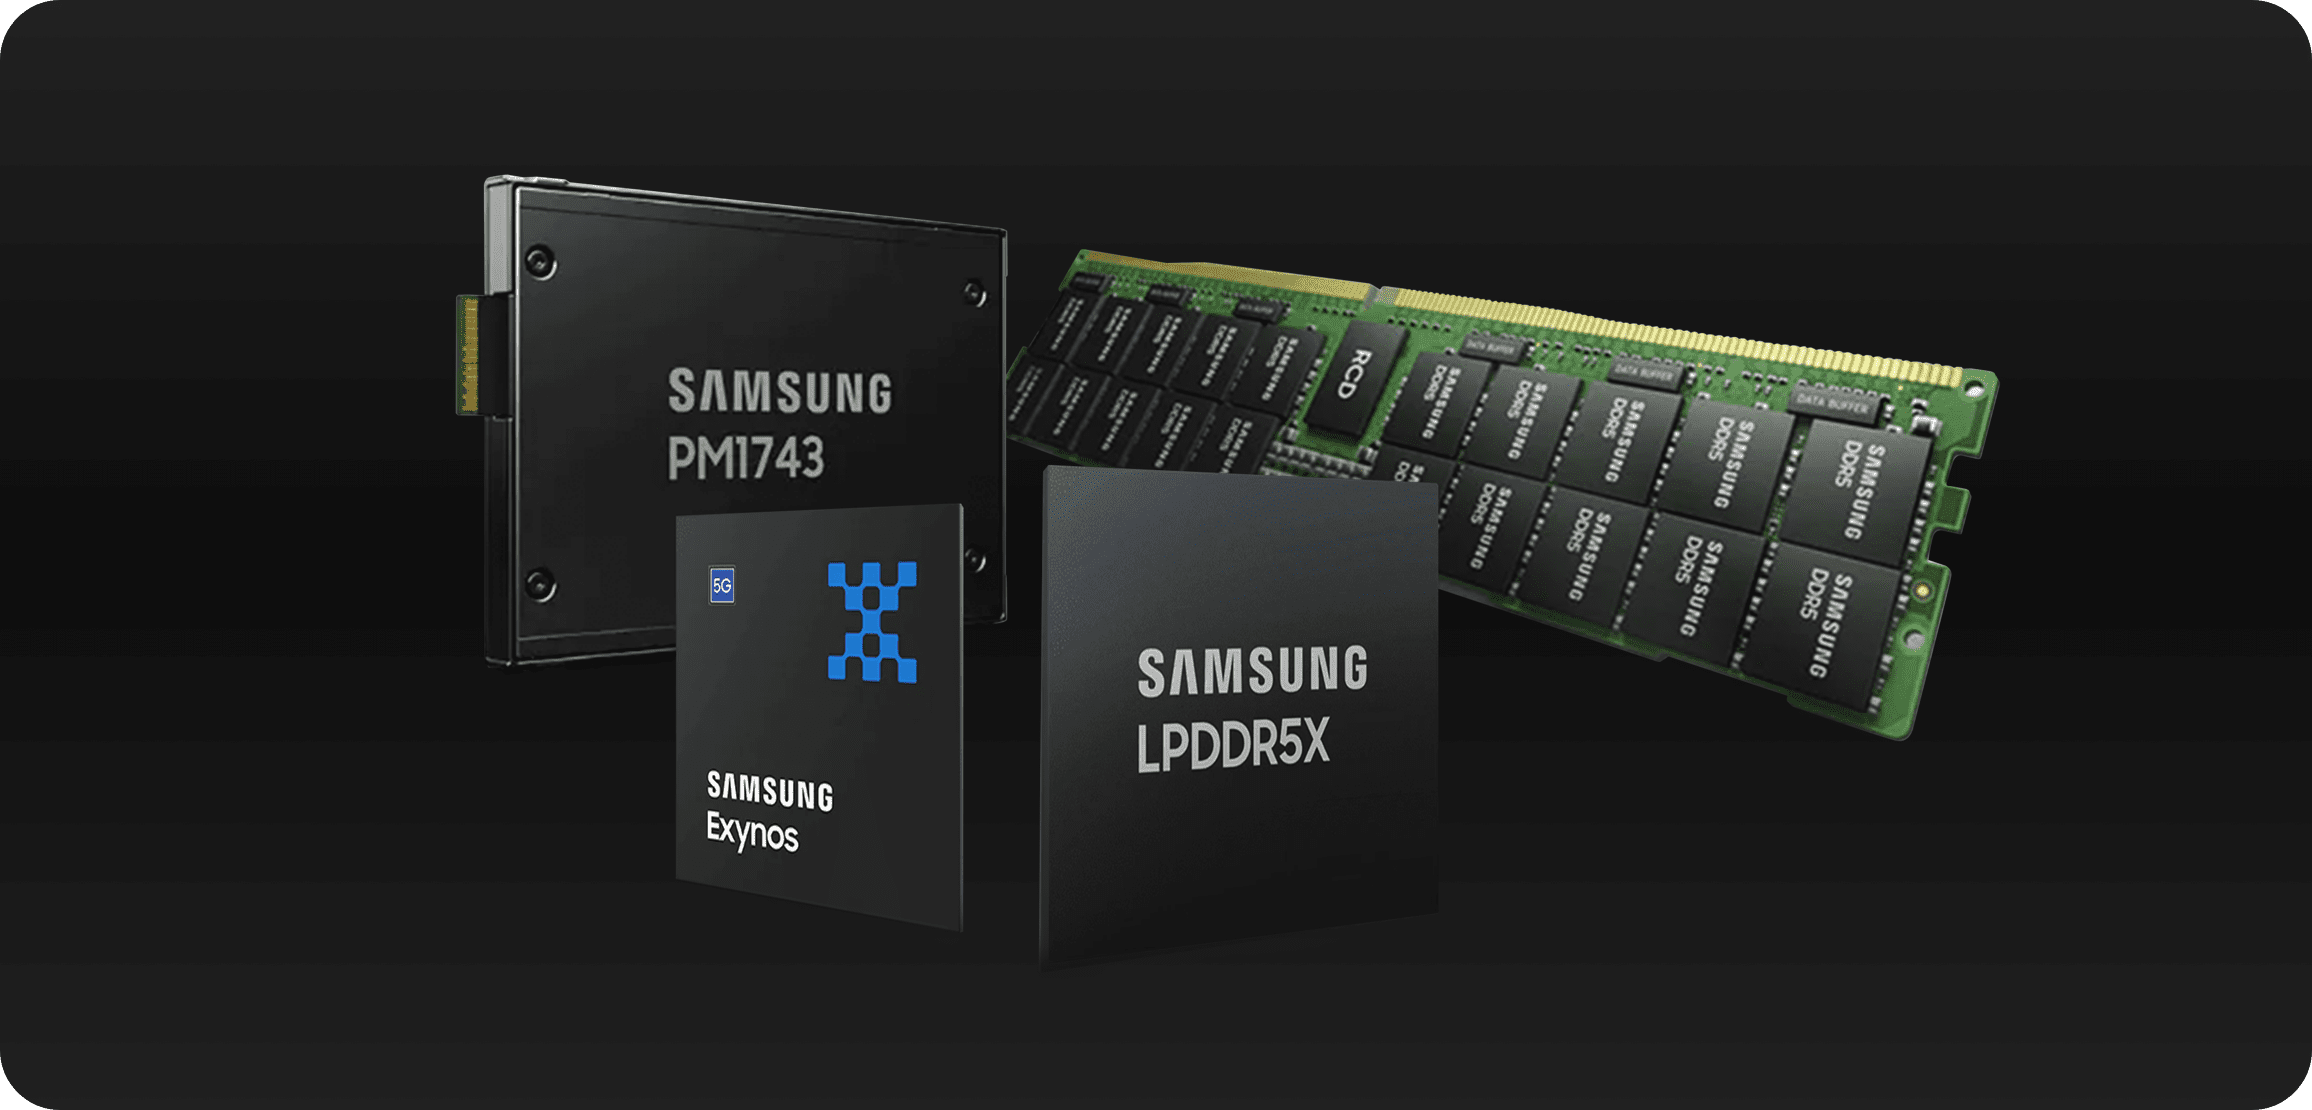 An image of 5G solutions including Exynos processor, enterprise SSD, LPDDR5X and DDR5.